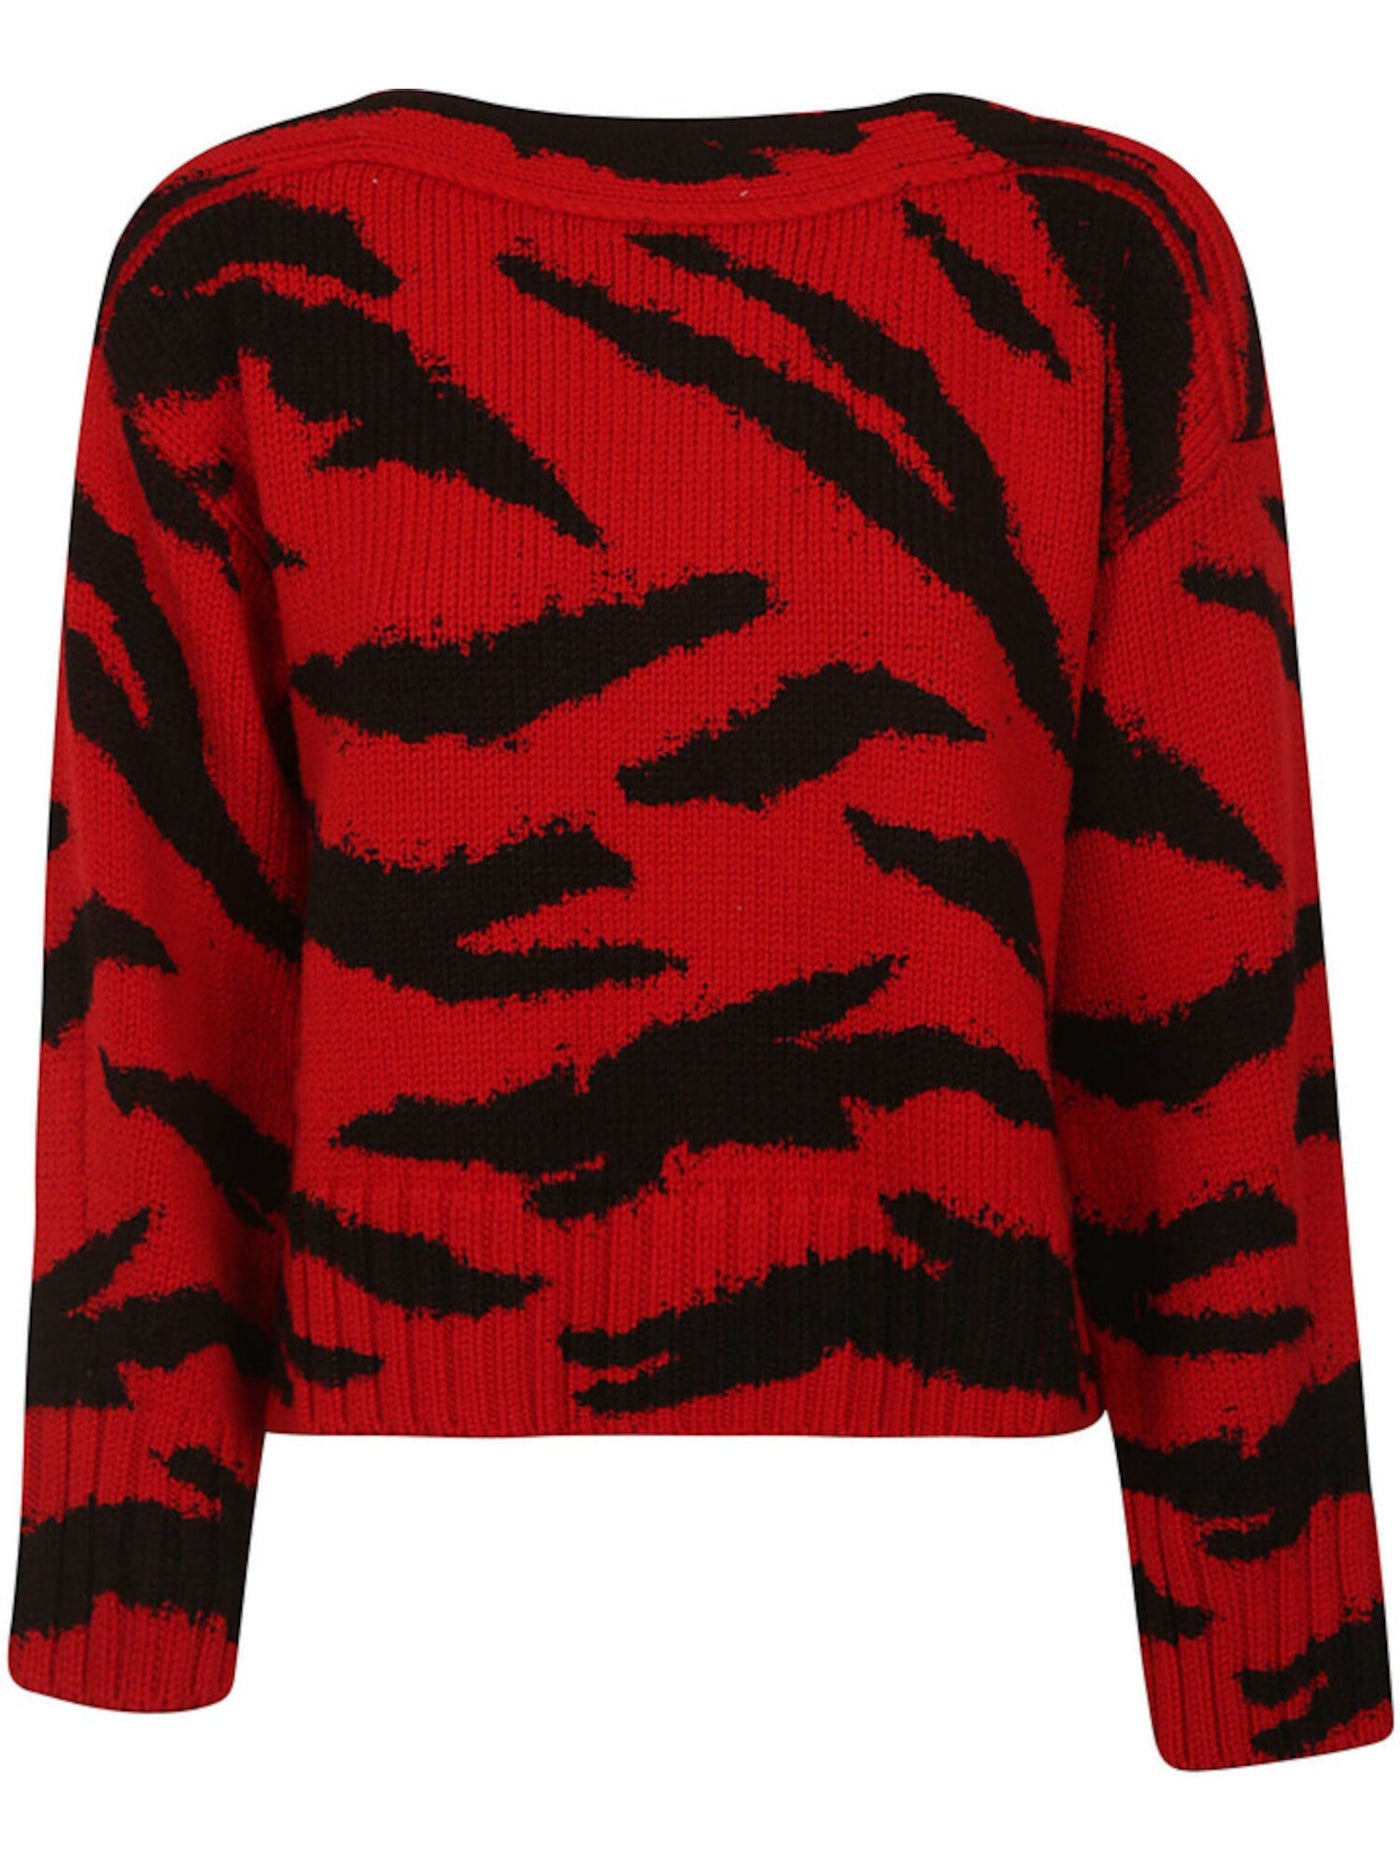 PHILOSOPHY Womens Red Animal Print Long Sleeve Boat Neck Sweater Size: 10